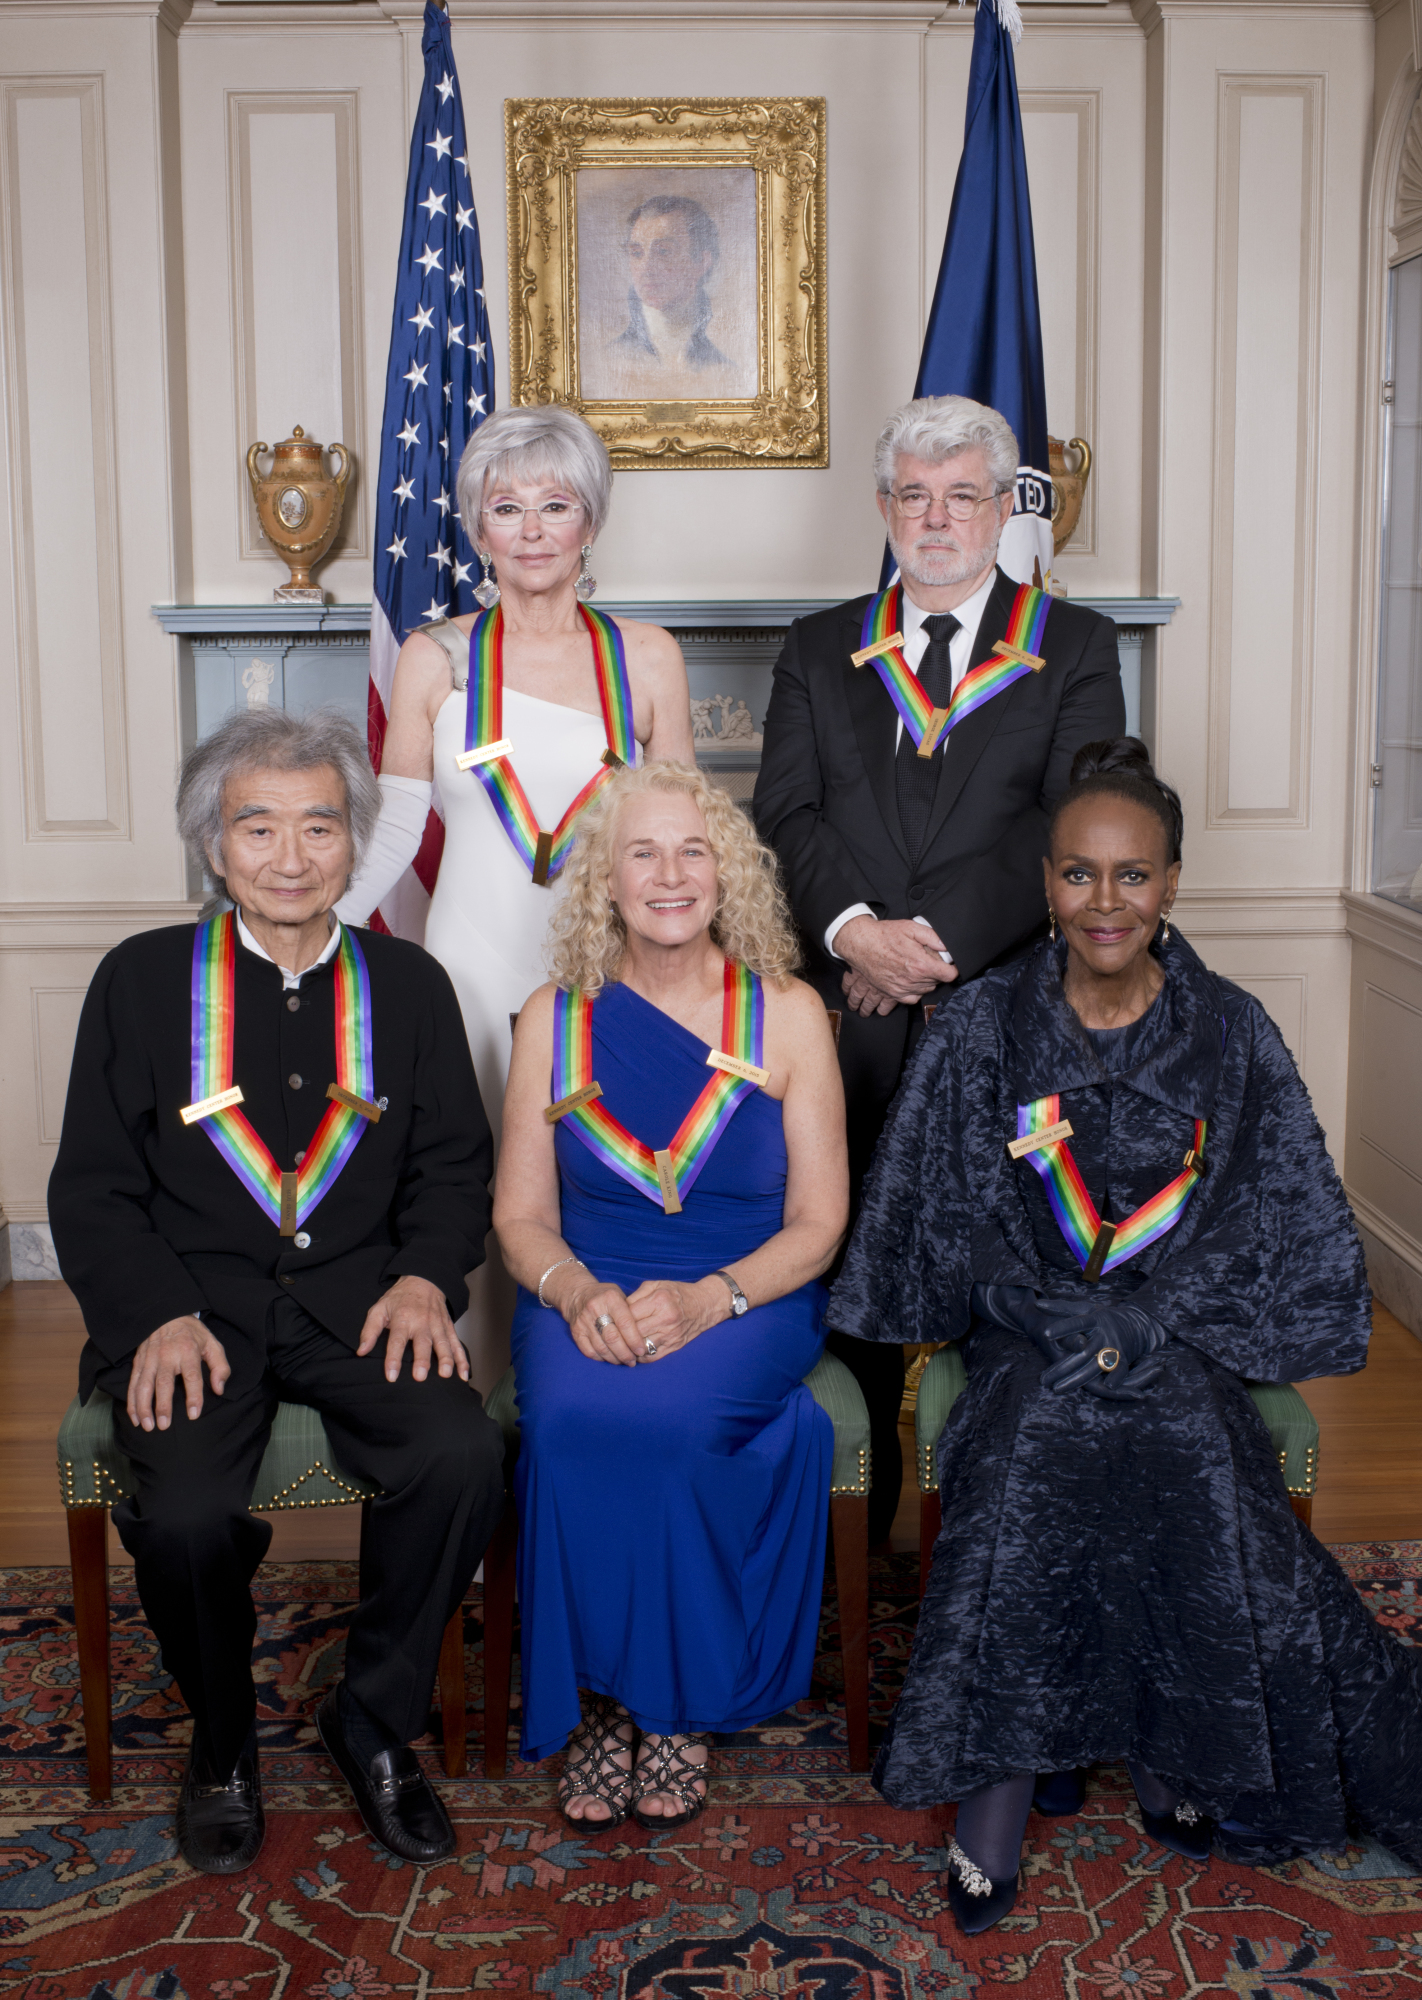 Rita Moreno on Why the Kennedy Center Honors 'Is Really the Pinnacle' of All Awards